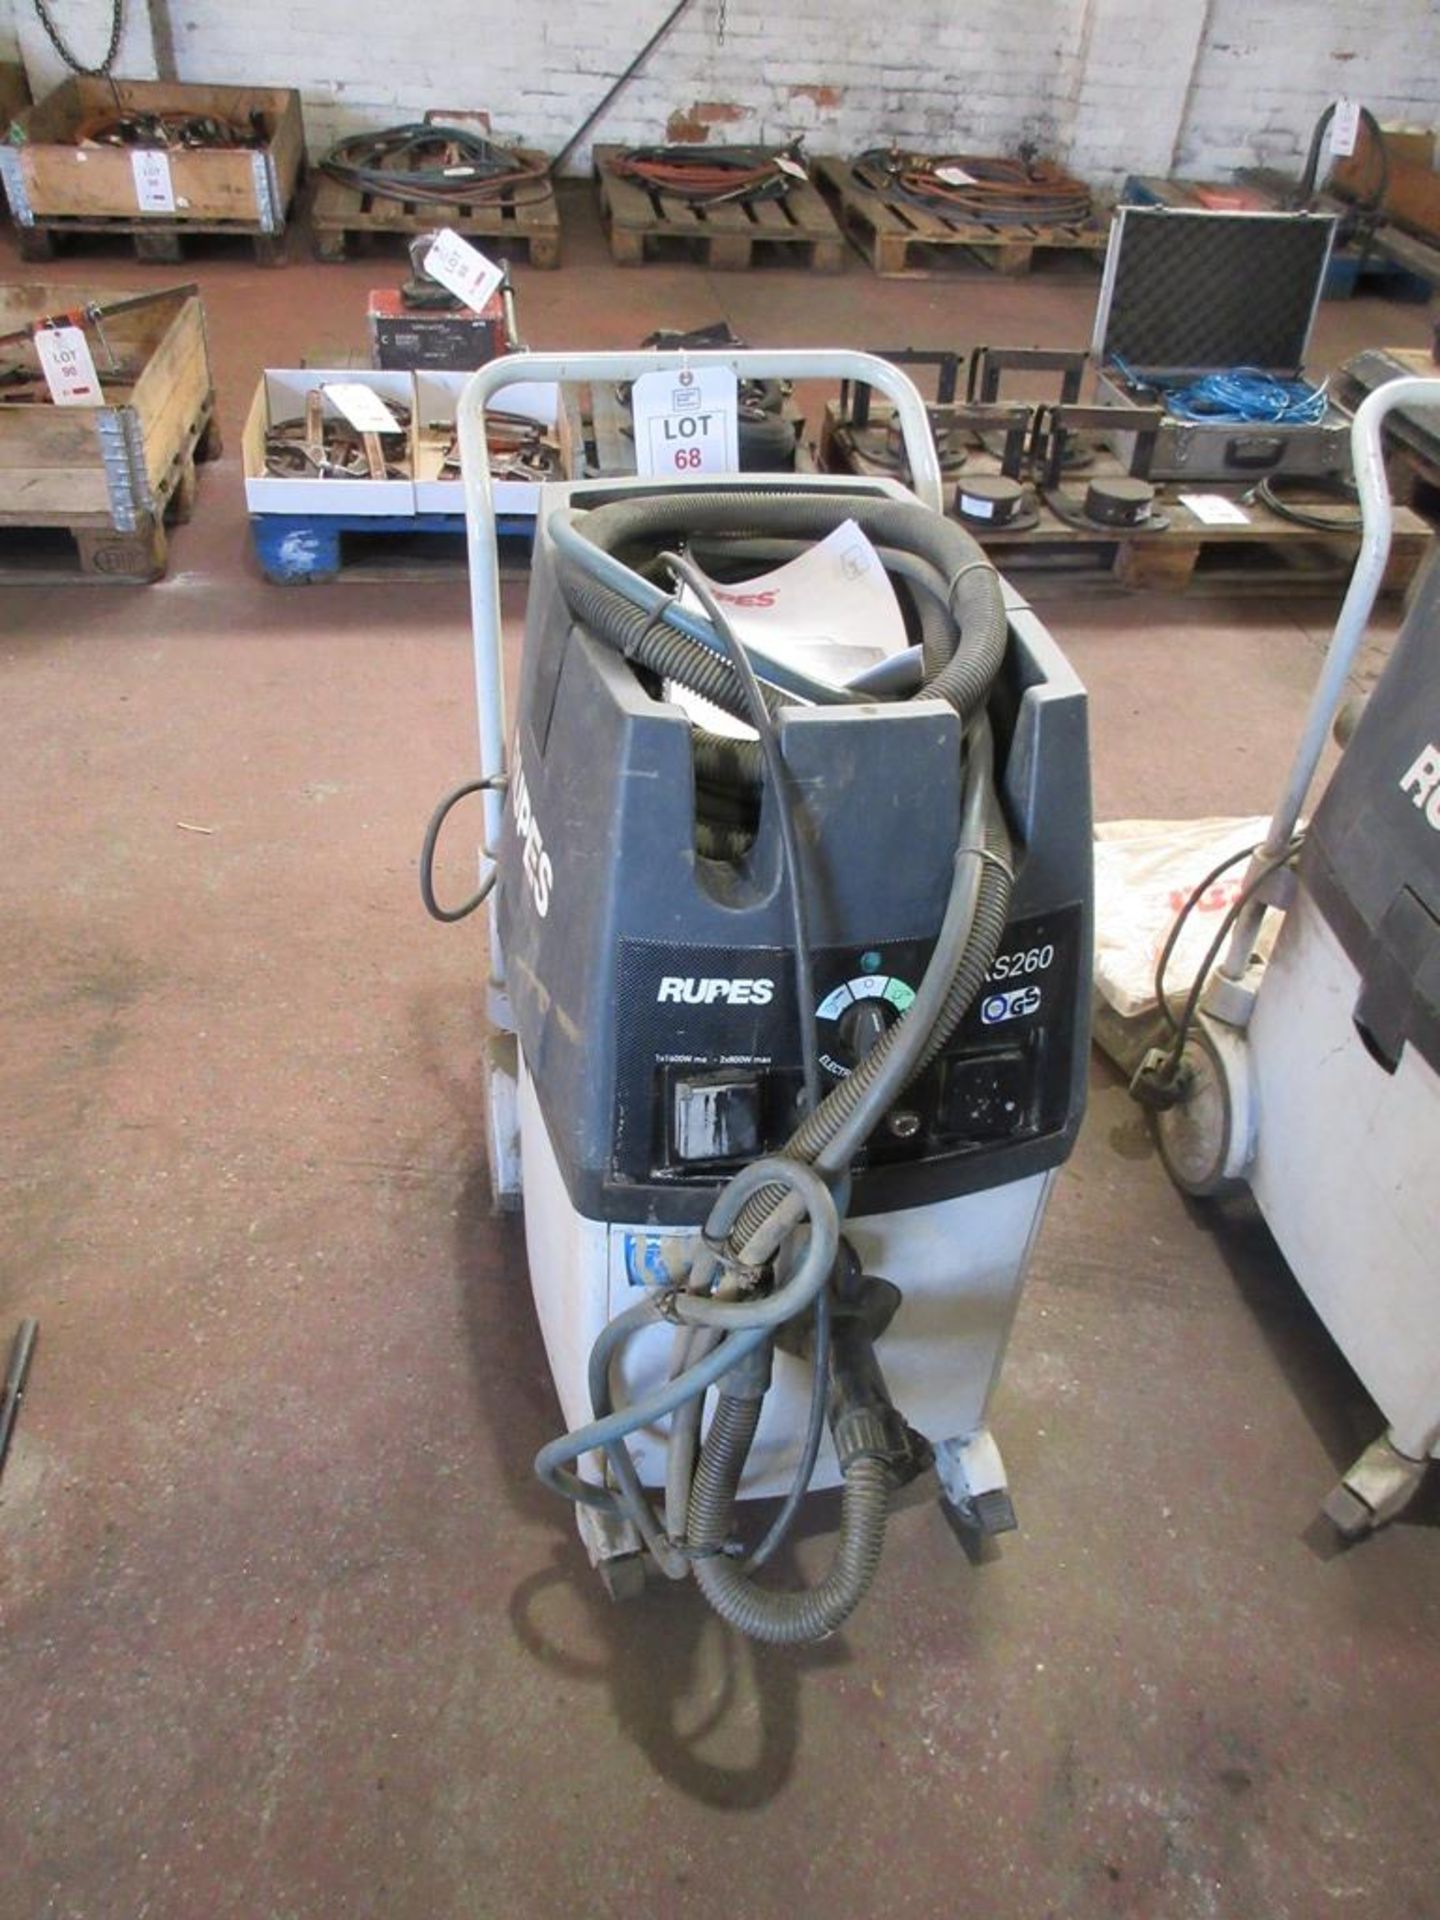 RUPES mobile dust extraction unit, Type KS260EP, 240V, S/No 11045 (2010)